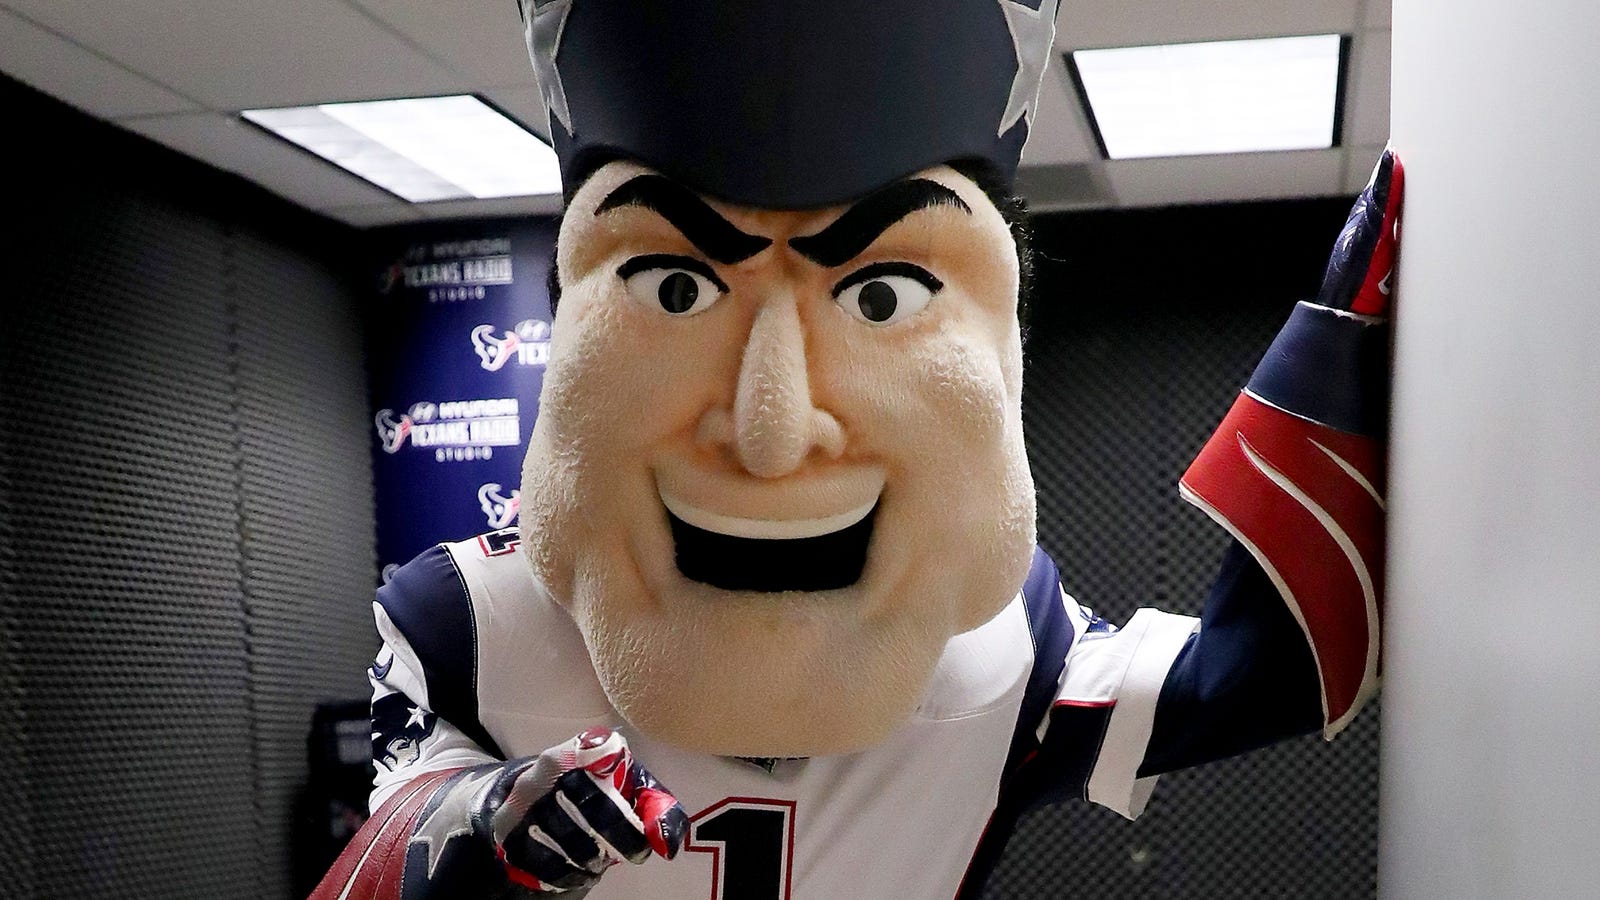 Pat Patriot Denies Being Mascot #5 In Prostitution Sting Police Report1600 x 900